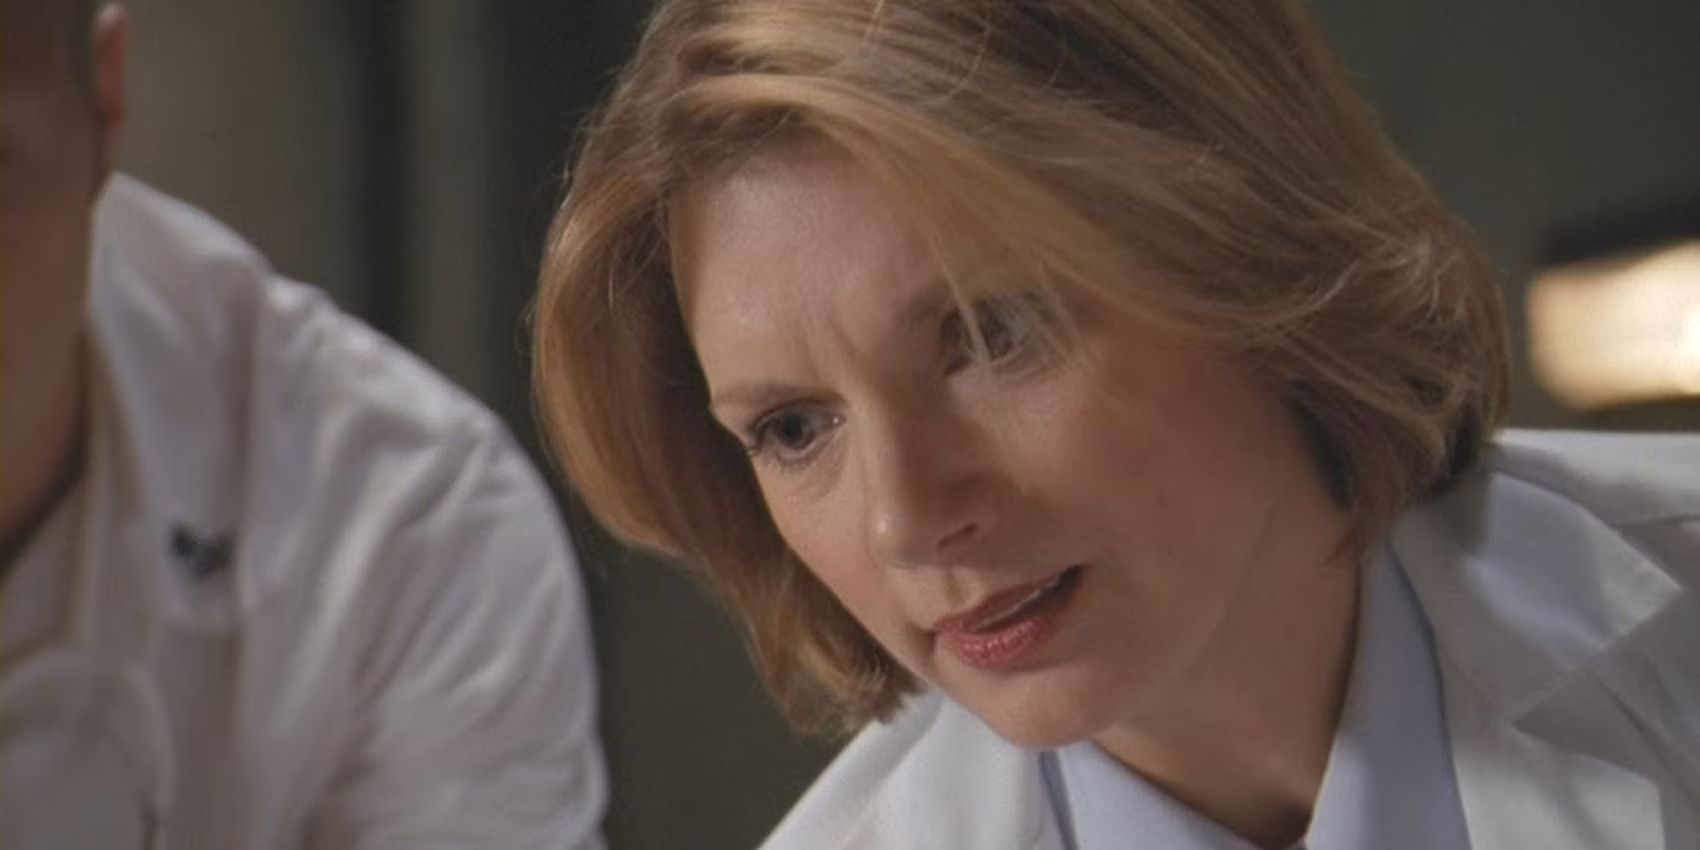 Stargate SG-1 Janet Fraiser looks worriedly down at a patient